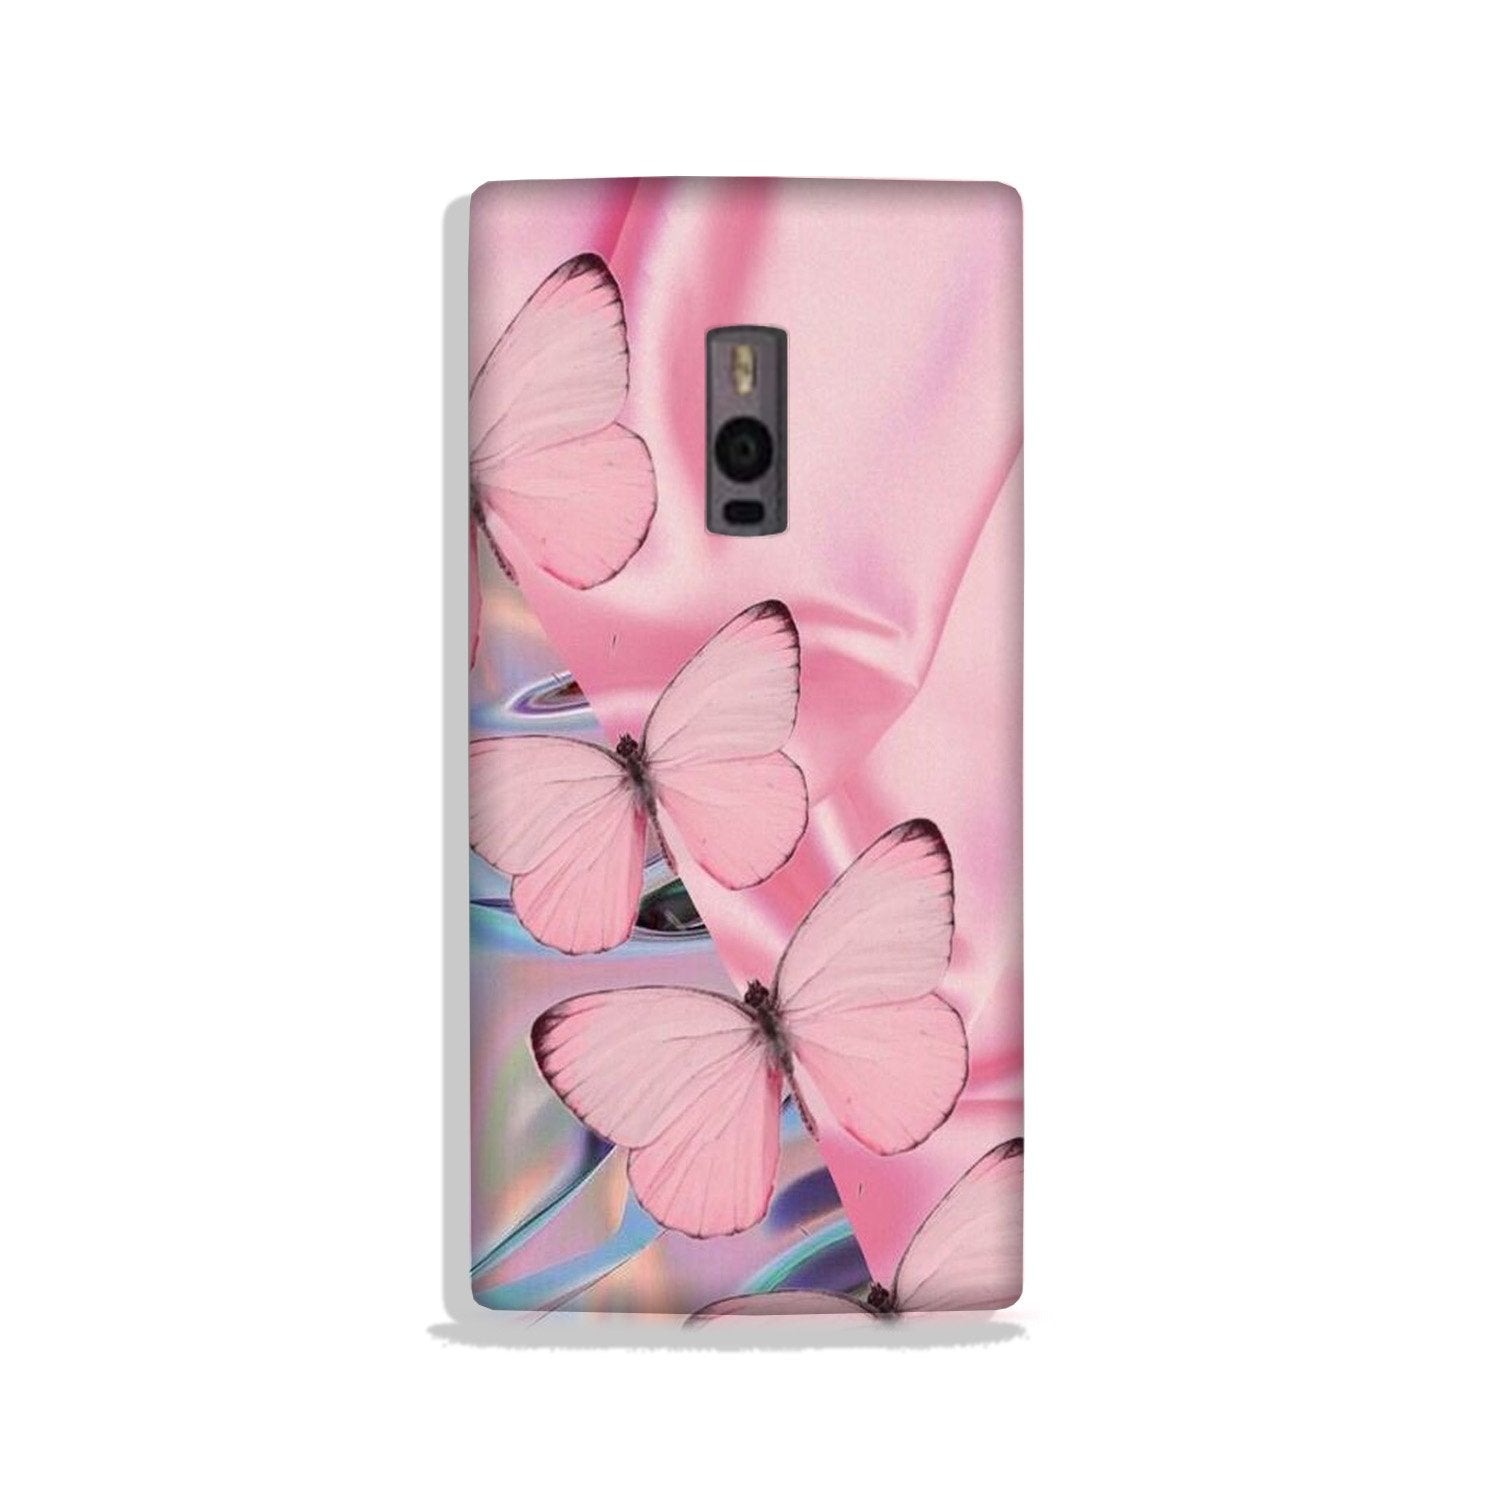 Butterflies Case for OnePlus 2